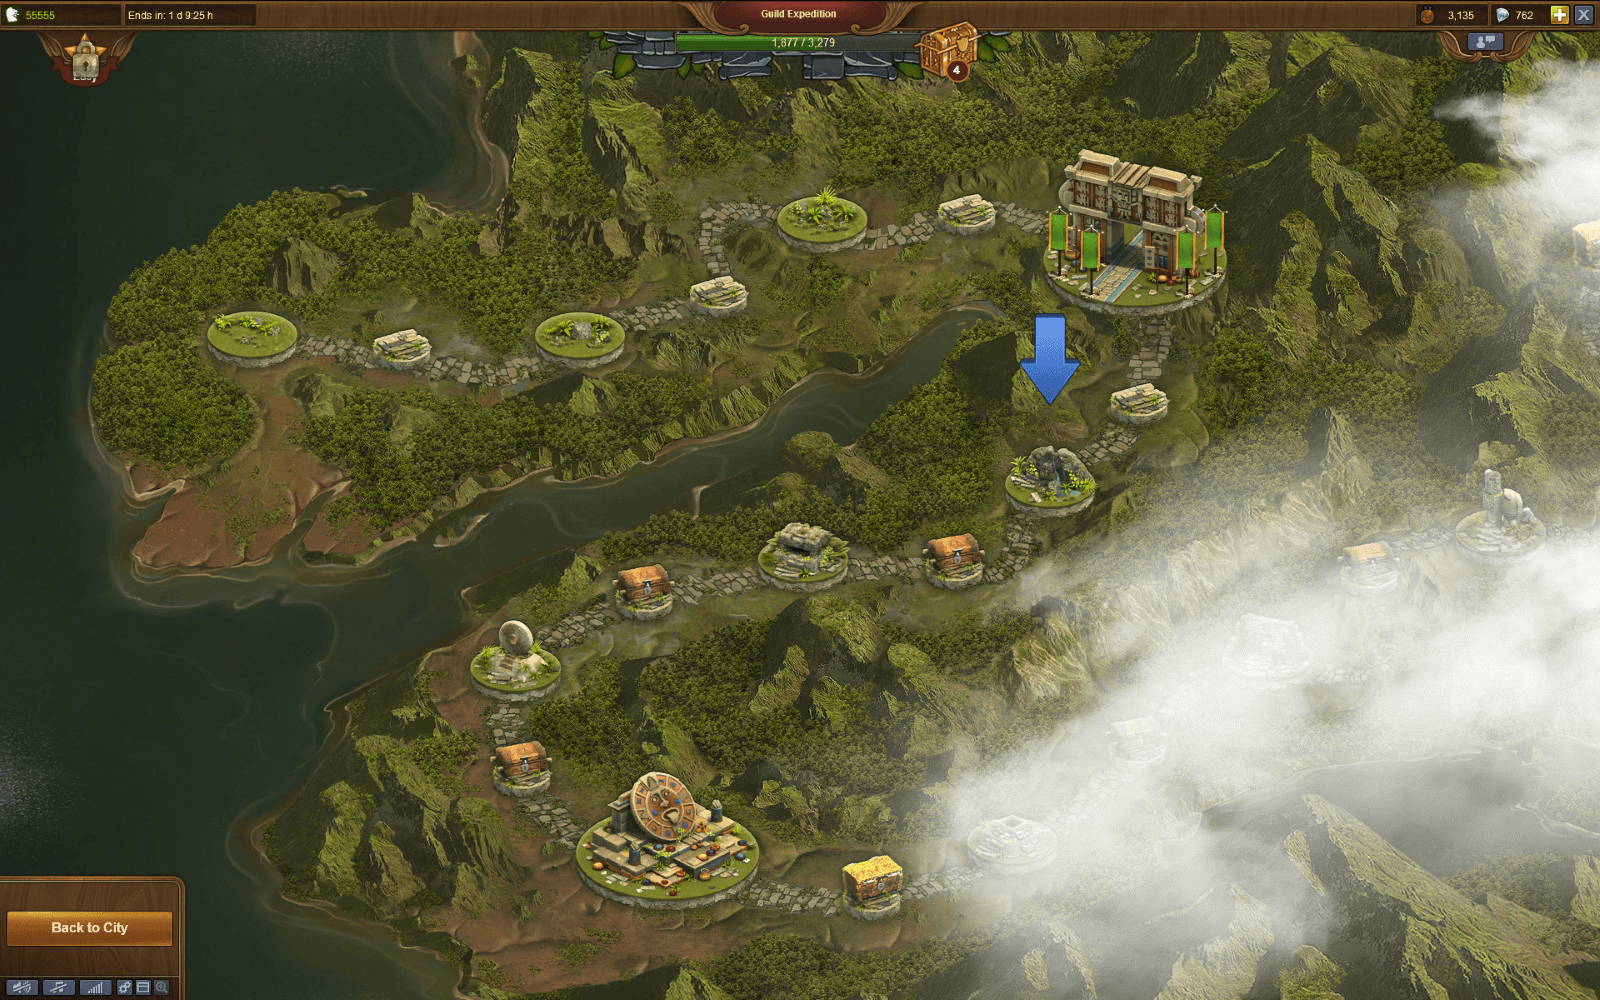 forge of empires using remouse